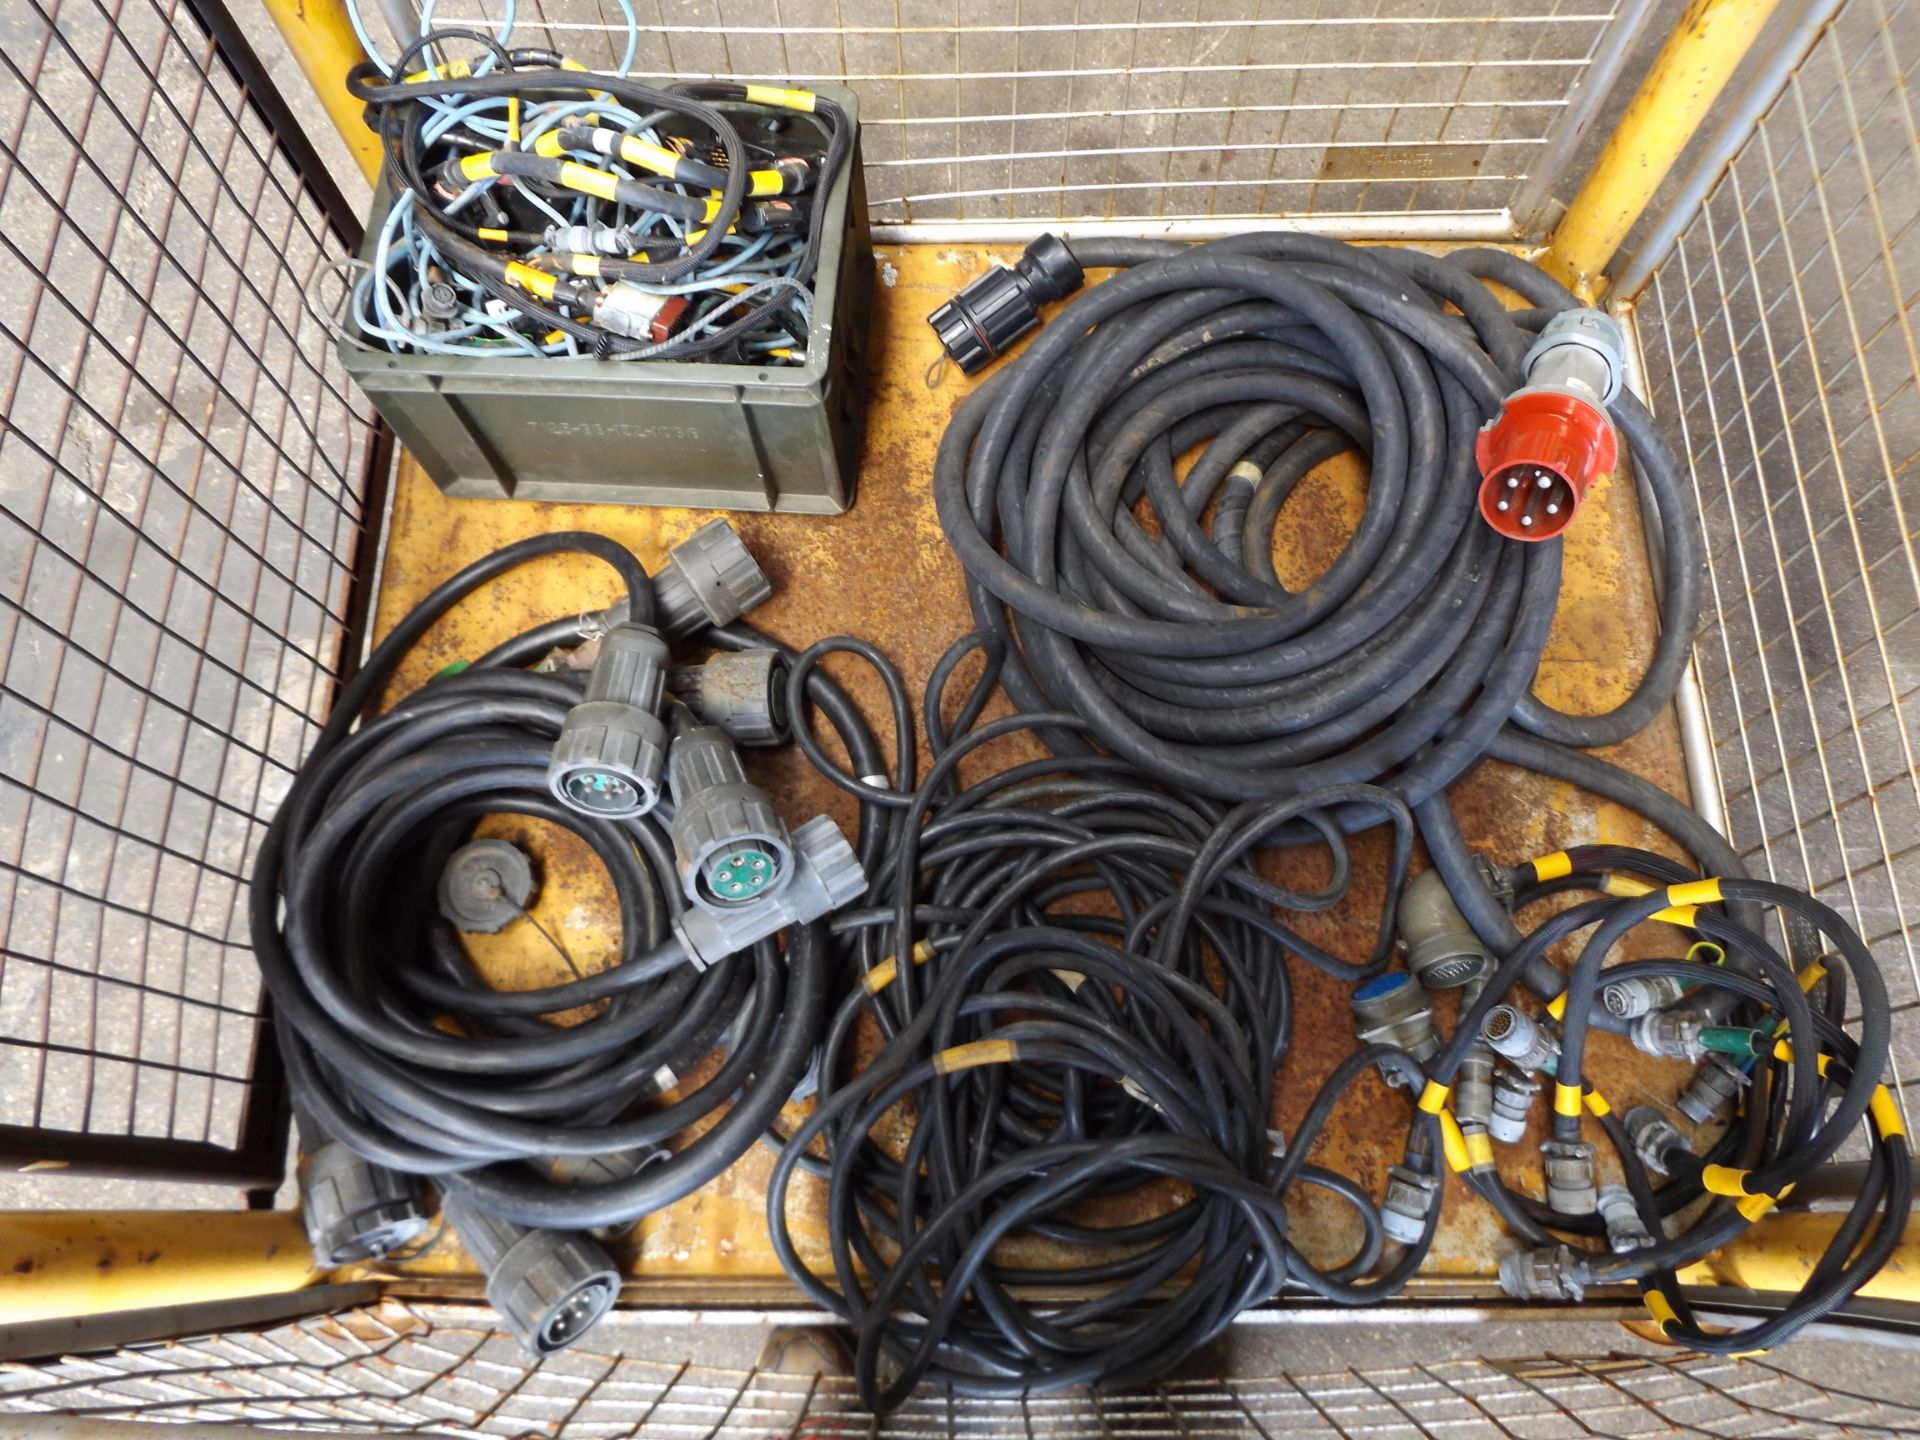 Mixed Stillage of Electrical Cable and Connectors